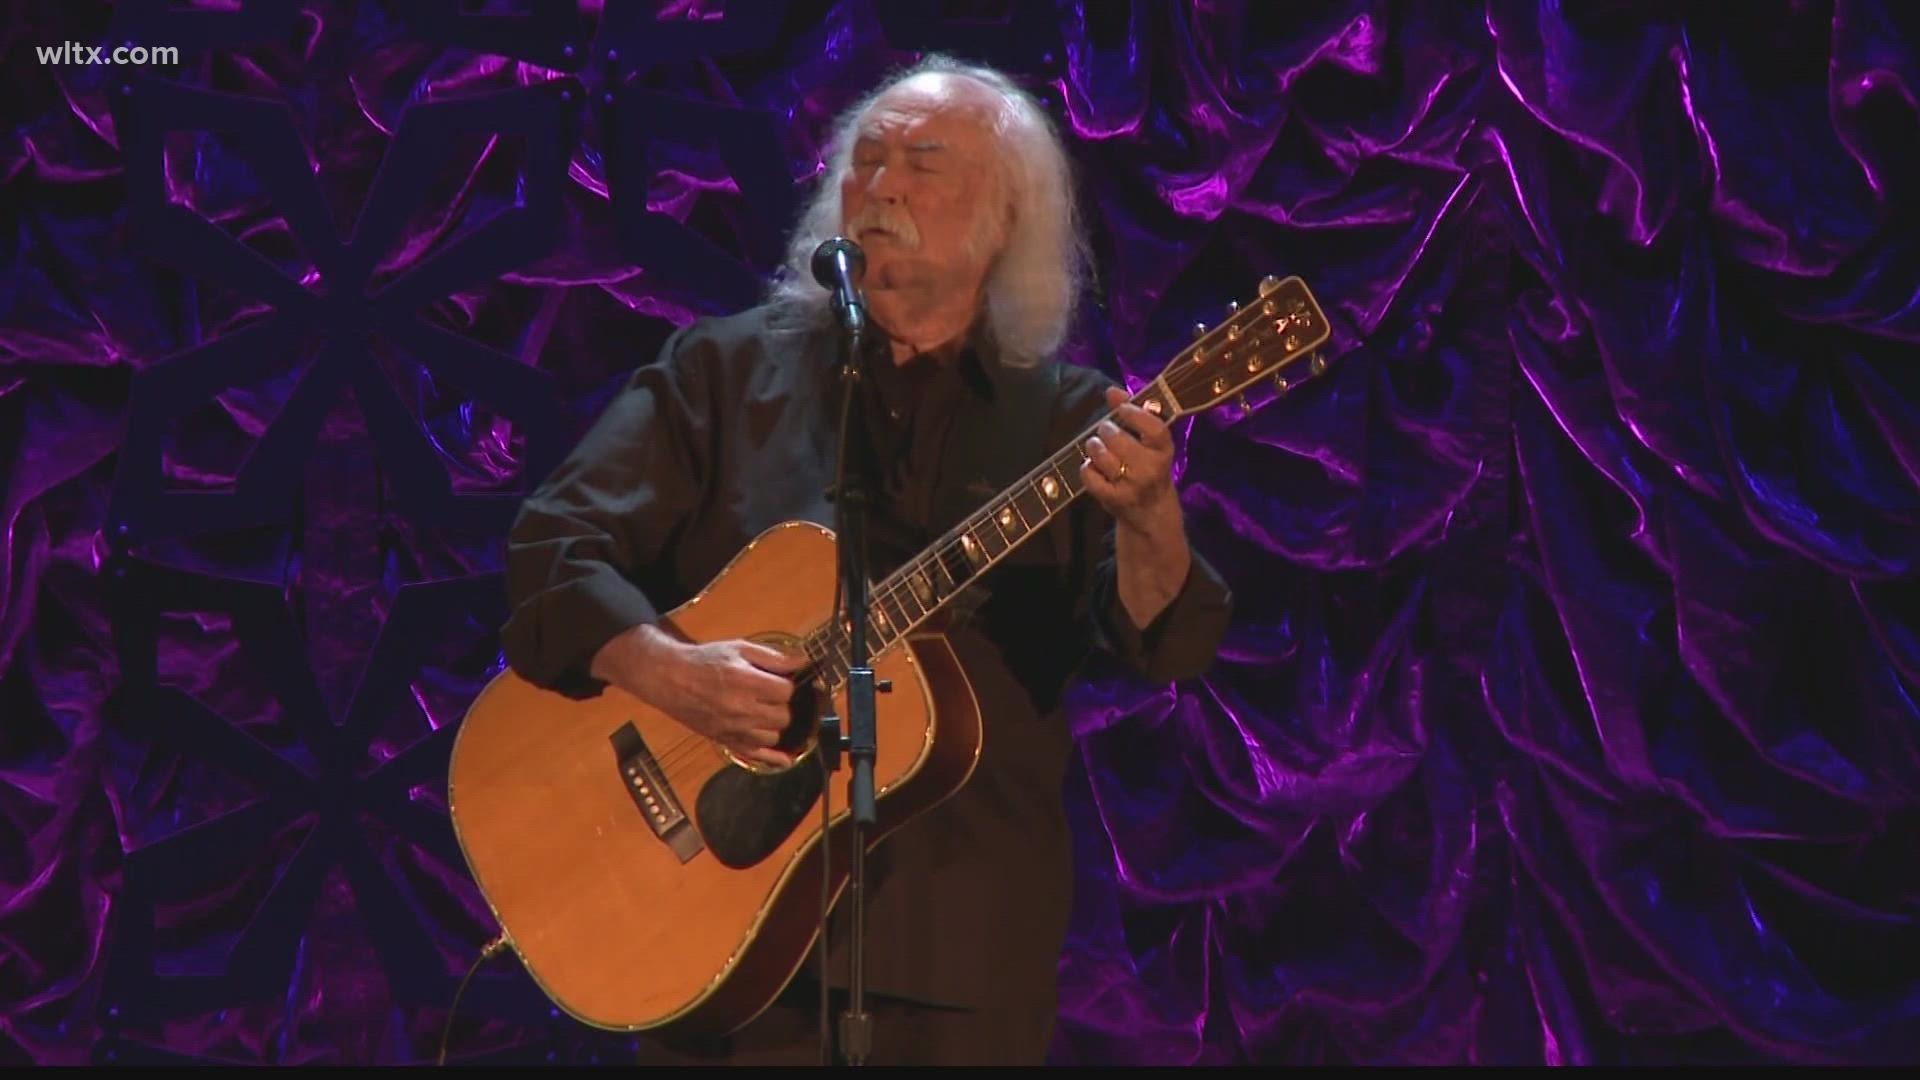 David Crosby was a founding member of the Byrds and Crosby, Stills & Nash, two influential rock groups of the 1960s.